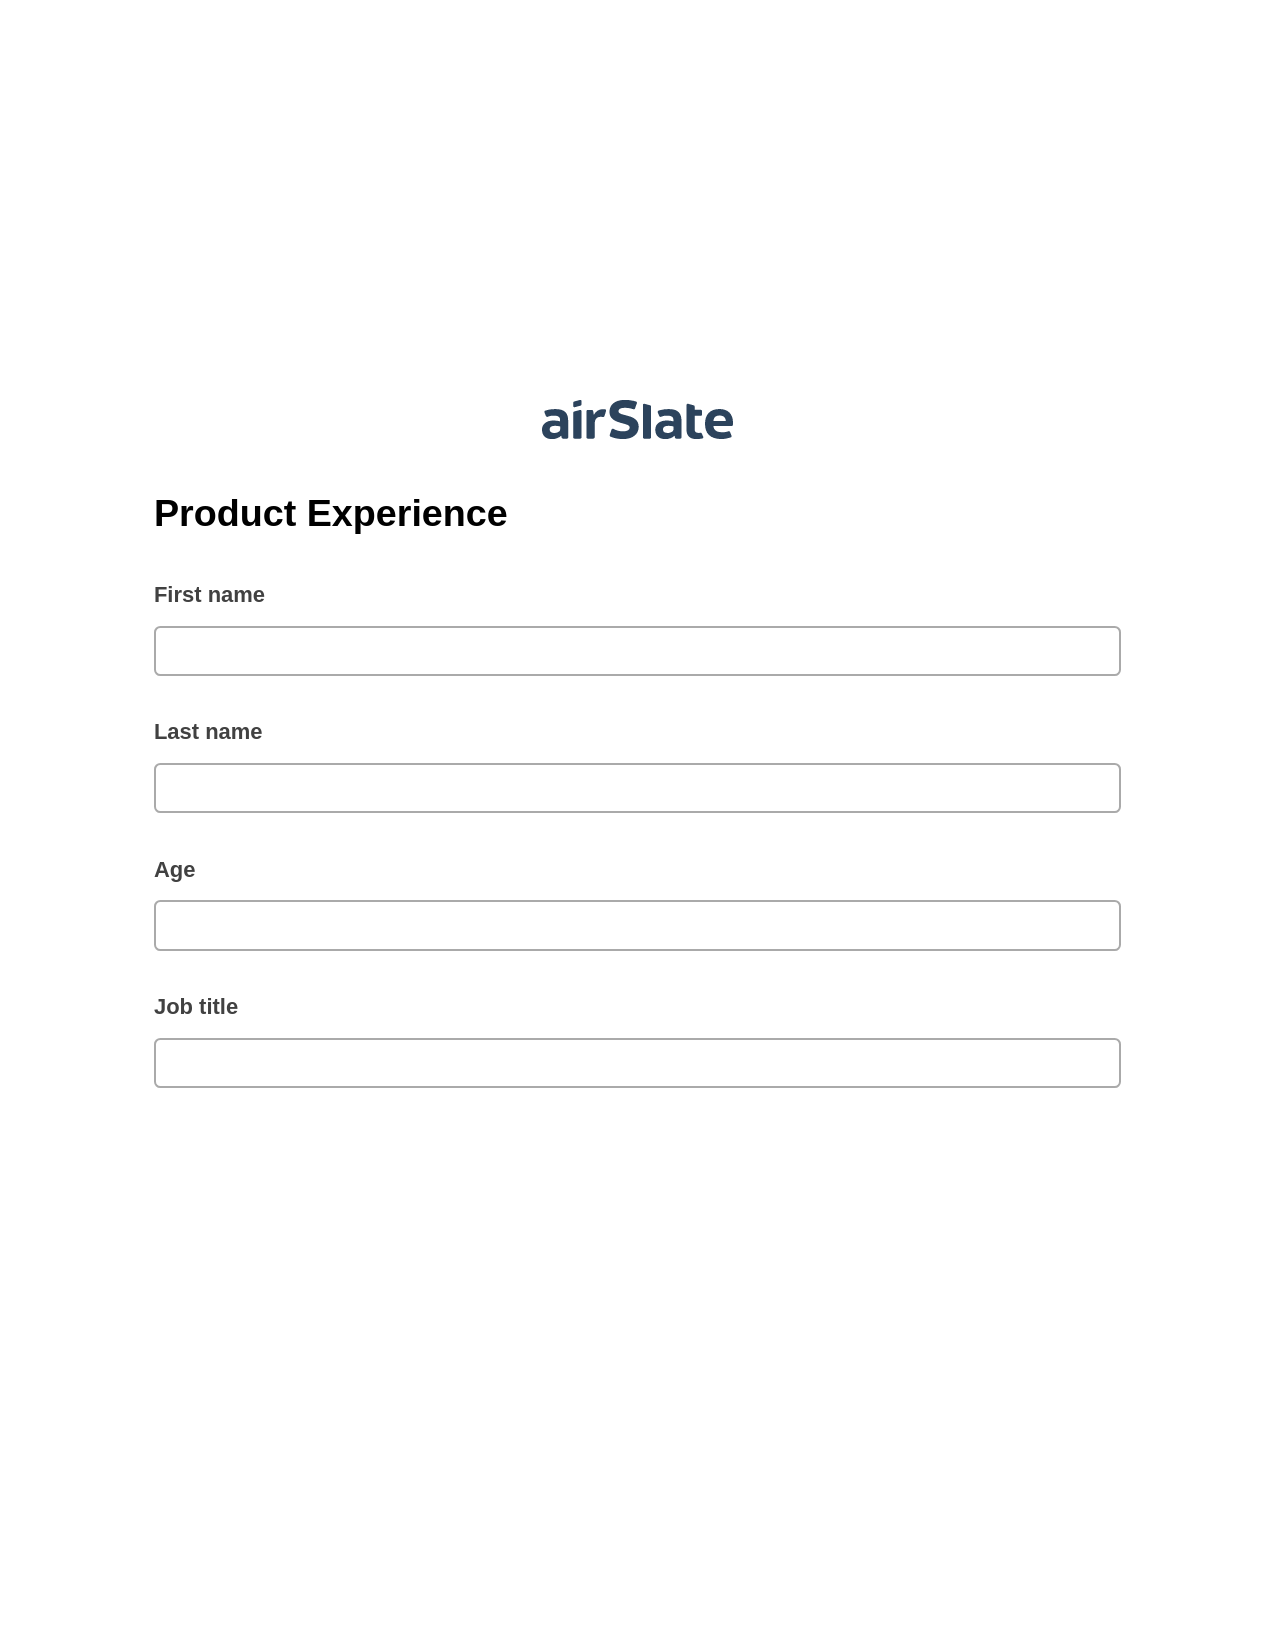 Product Experience Pre-fill from CSV File Bot, Email Notification Bot, Webhook Postfinish Bot